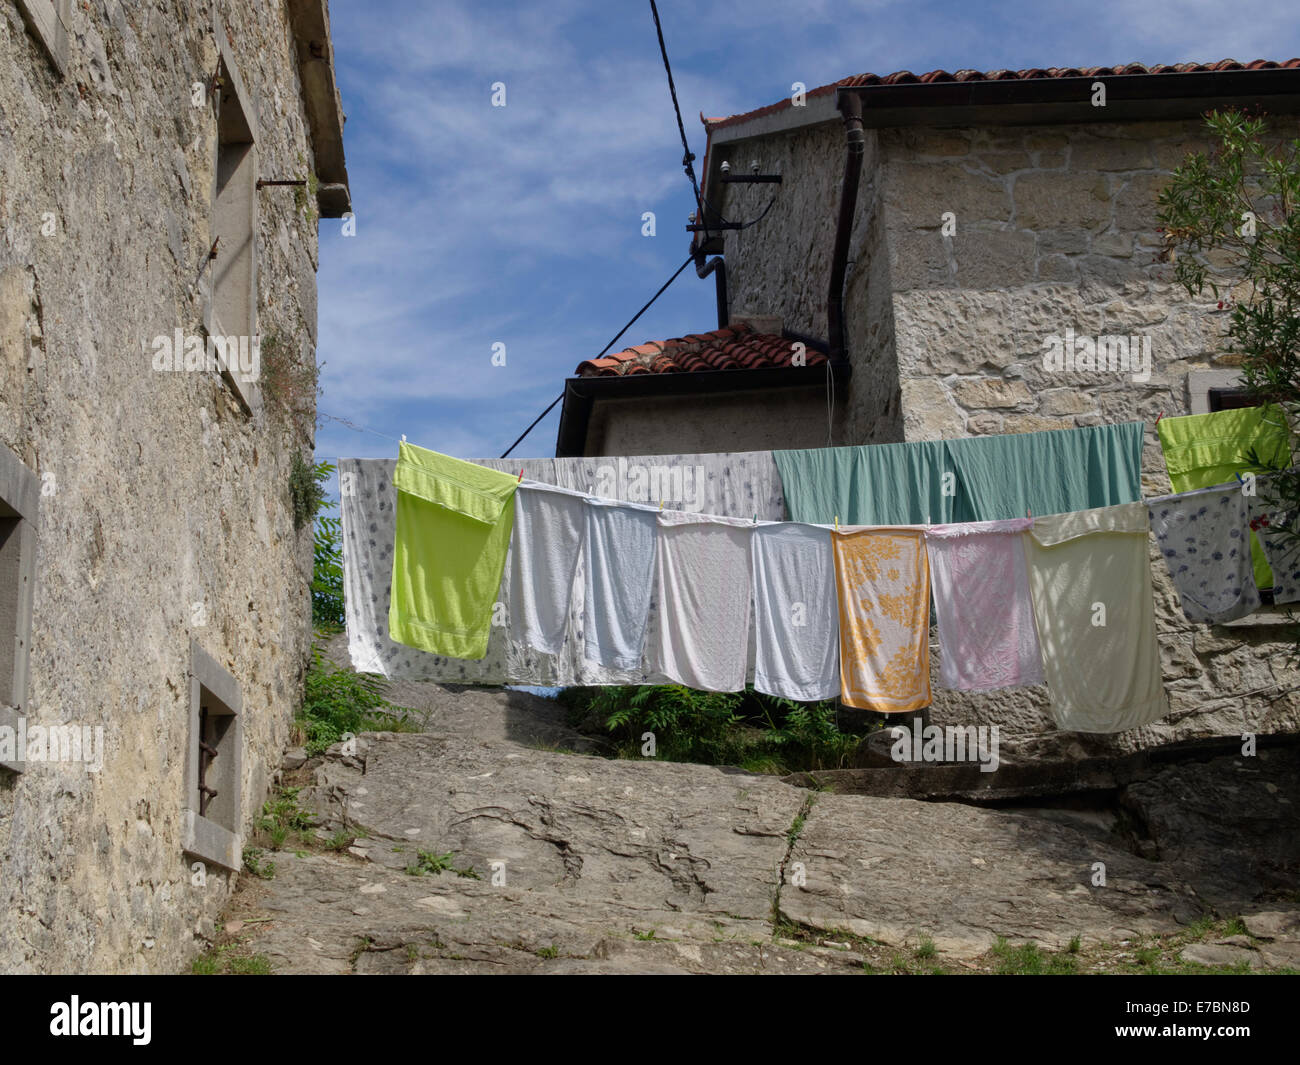 Drying clothes in Hum, the smallest town in the world, located in Croatia. Stock Photo